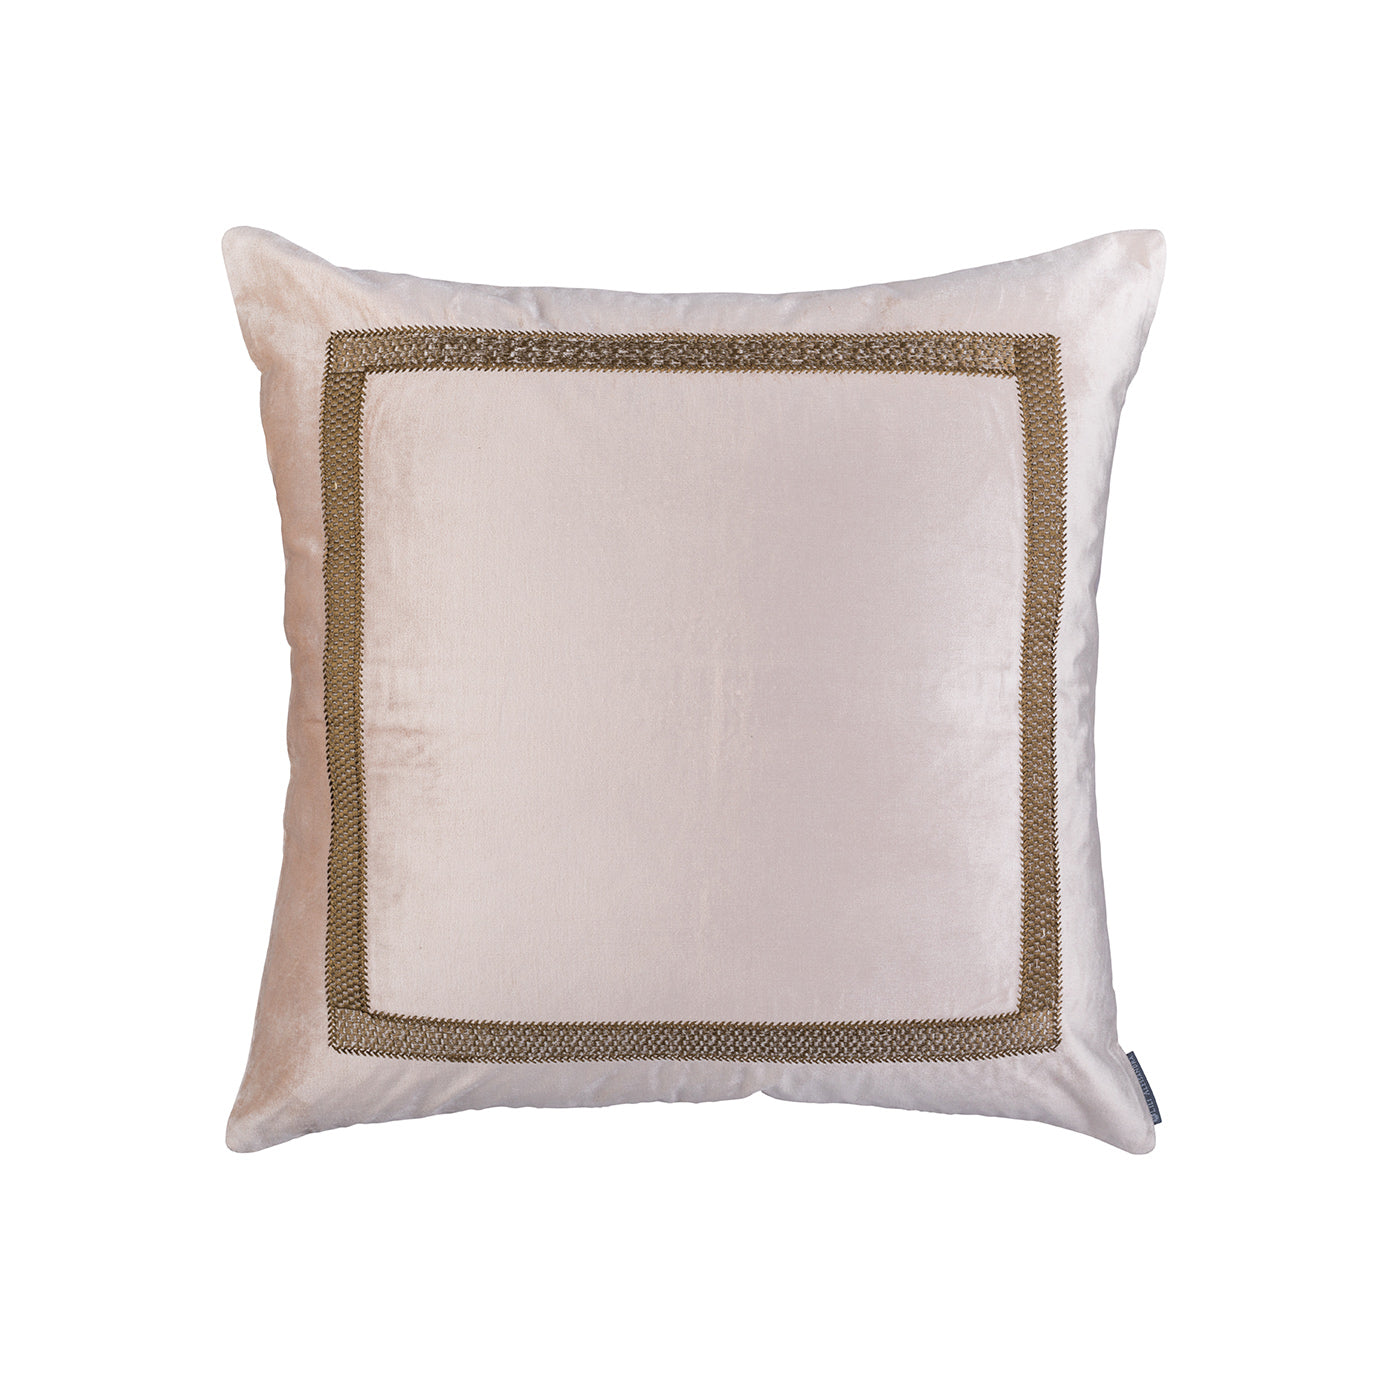 Caesar Sq. Pillow Blush Velvet With Gold Basketweave Machine Embroidery 24X24